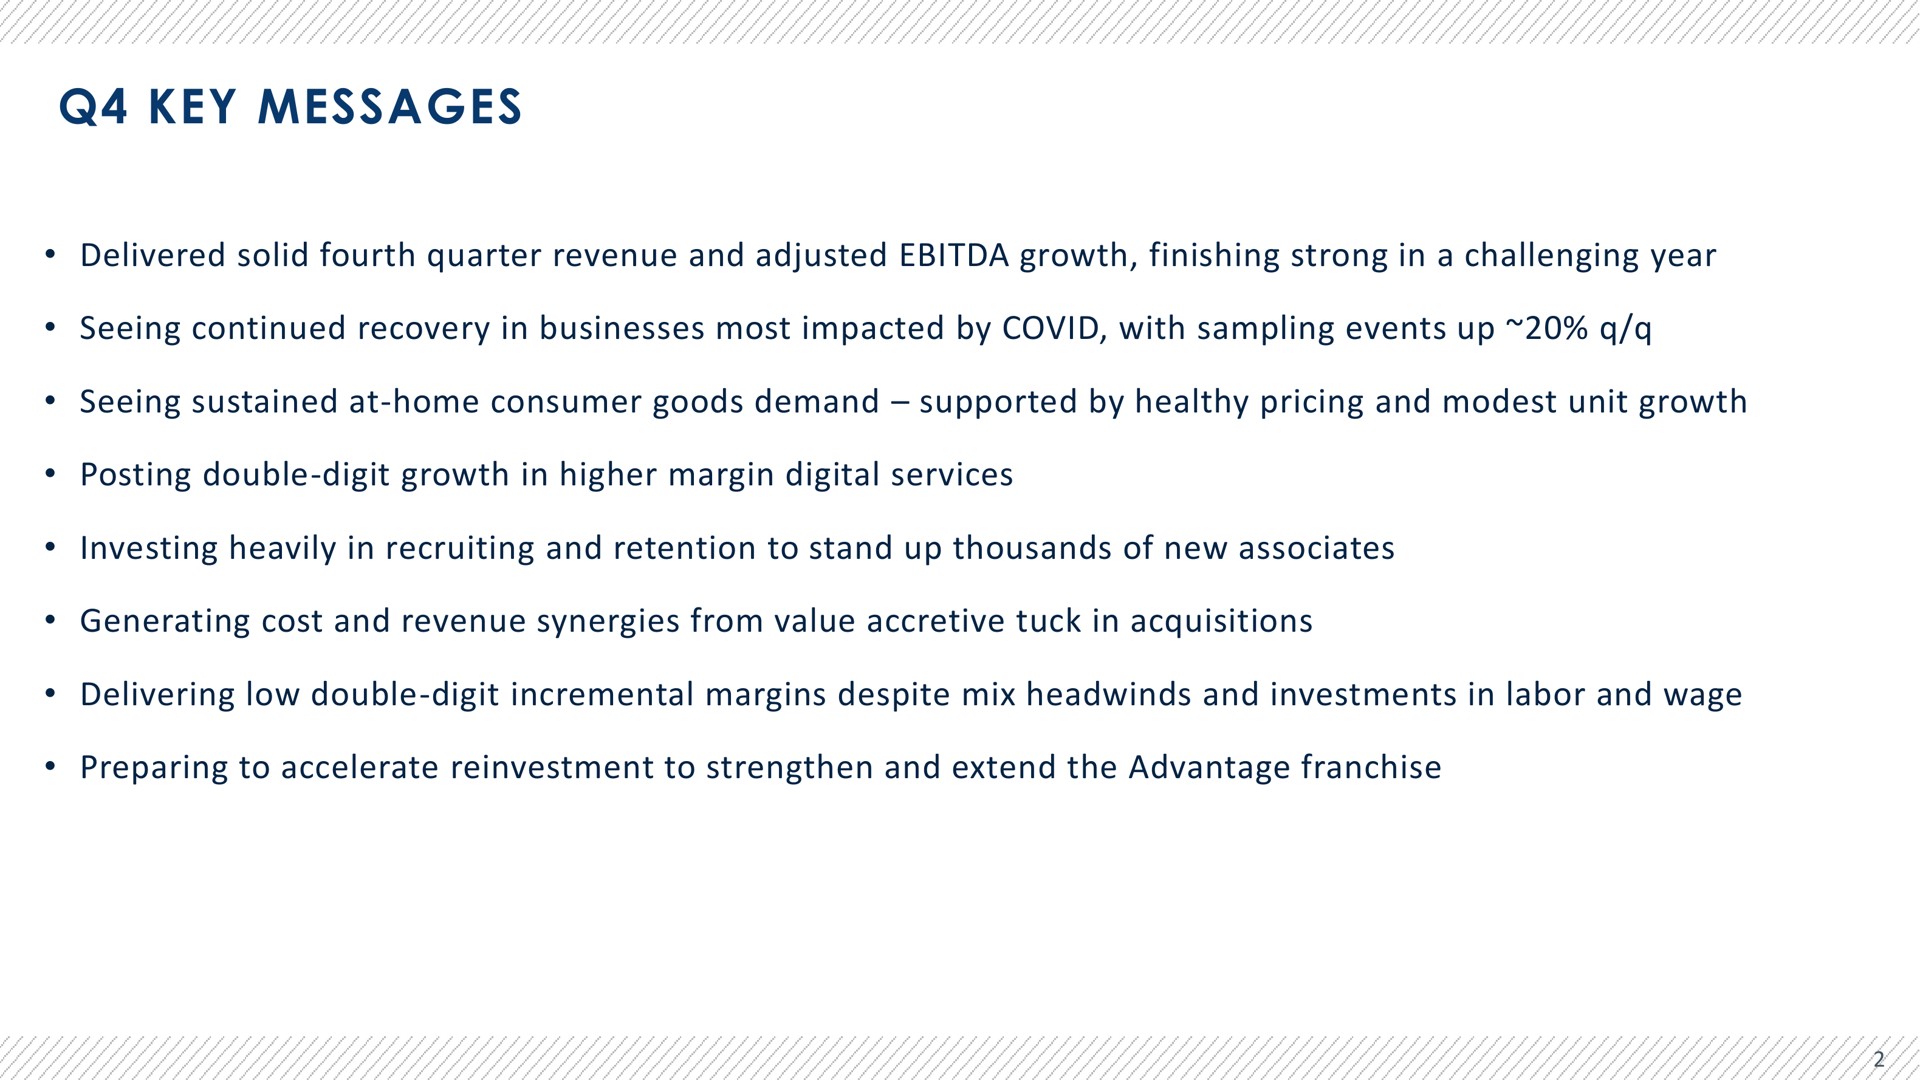 key messages delivered solid fourth quarter revenue and adjusted growth finishing strong in a challenging year seeing continued recovery in businesses most impacted by covid with sampling events up seeing sustained at home consumer goods demand supported by healthy pricing and modest unit growth posting double digit growth in higher margin digital services investing heavily in recruiting and retention to stand up thousands of new associates generating cost and revenue synergies from value accretive tuck in acquisitions delivering low double digit incremental margins despite mix and investments in labor and wage preparing to accelerate reinvestment to strengthen and extend the advantage franchise | Advantage Solutions